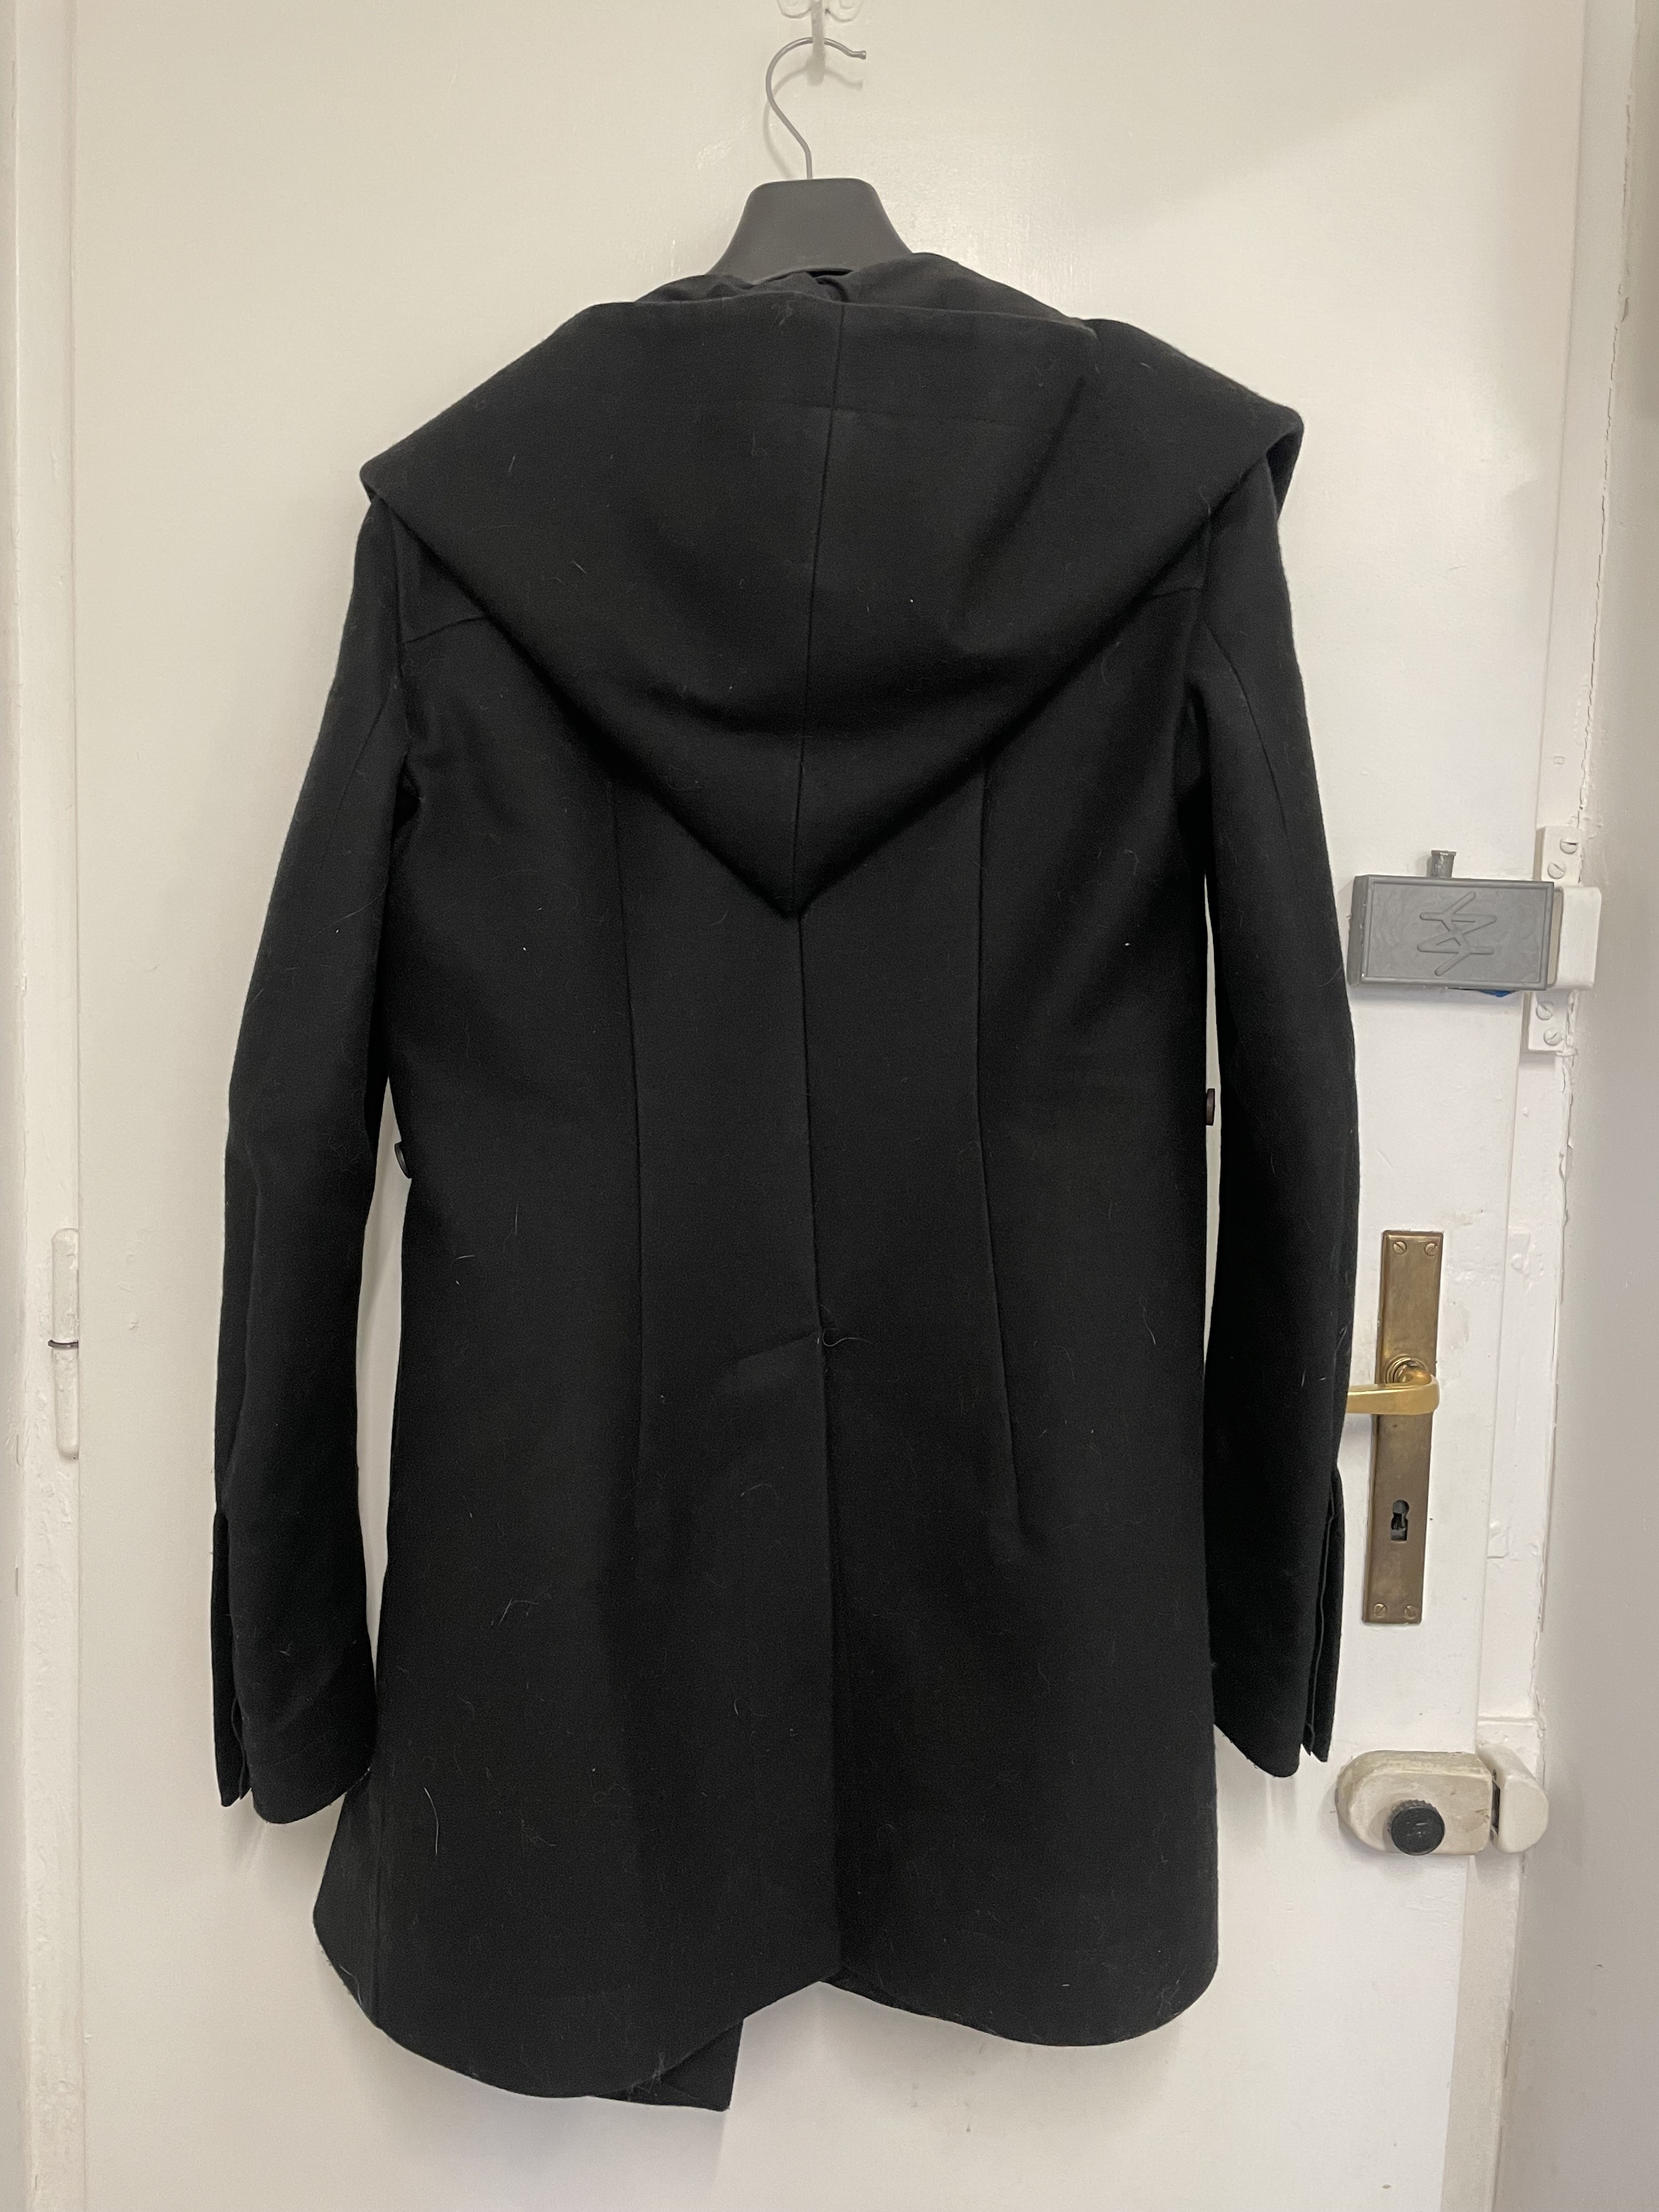 AW11 "Limo" New Wool Hooded Coat - 2